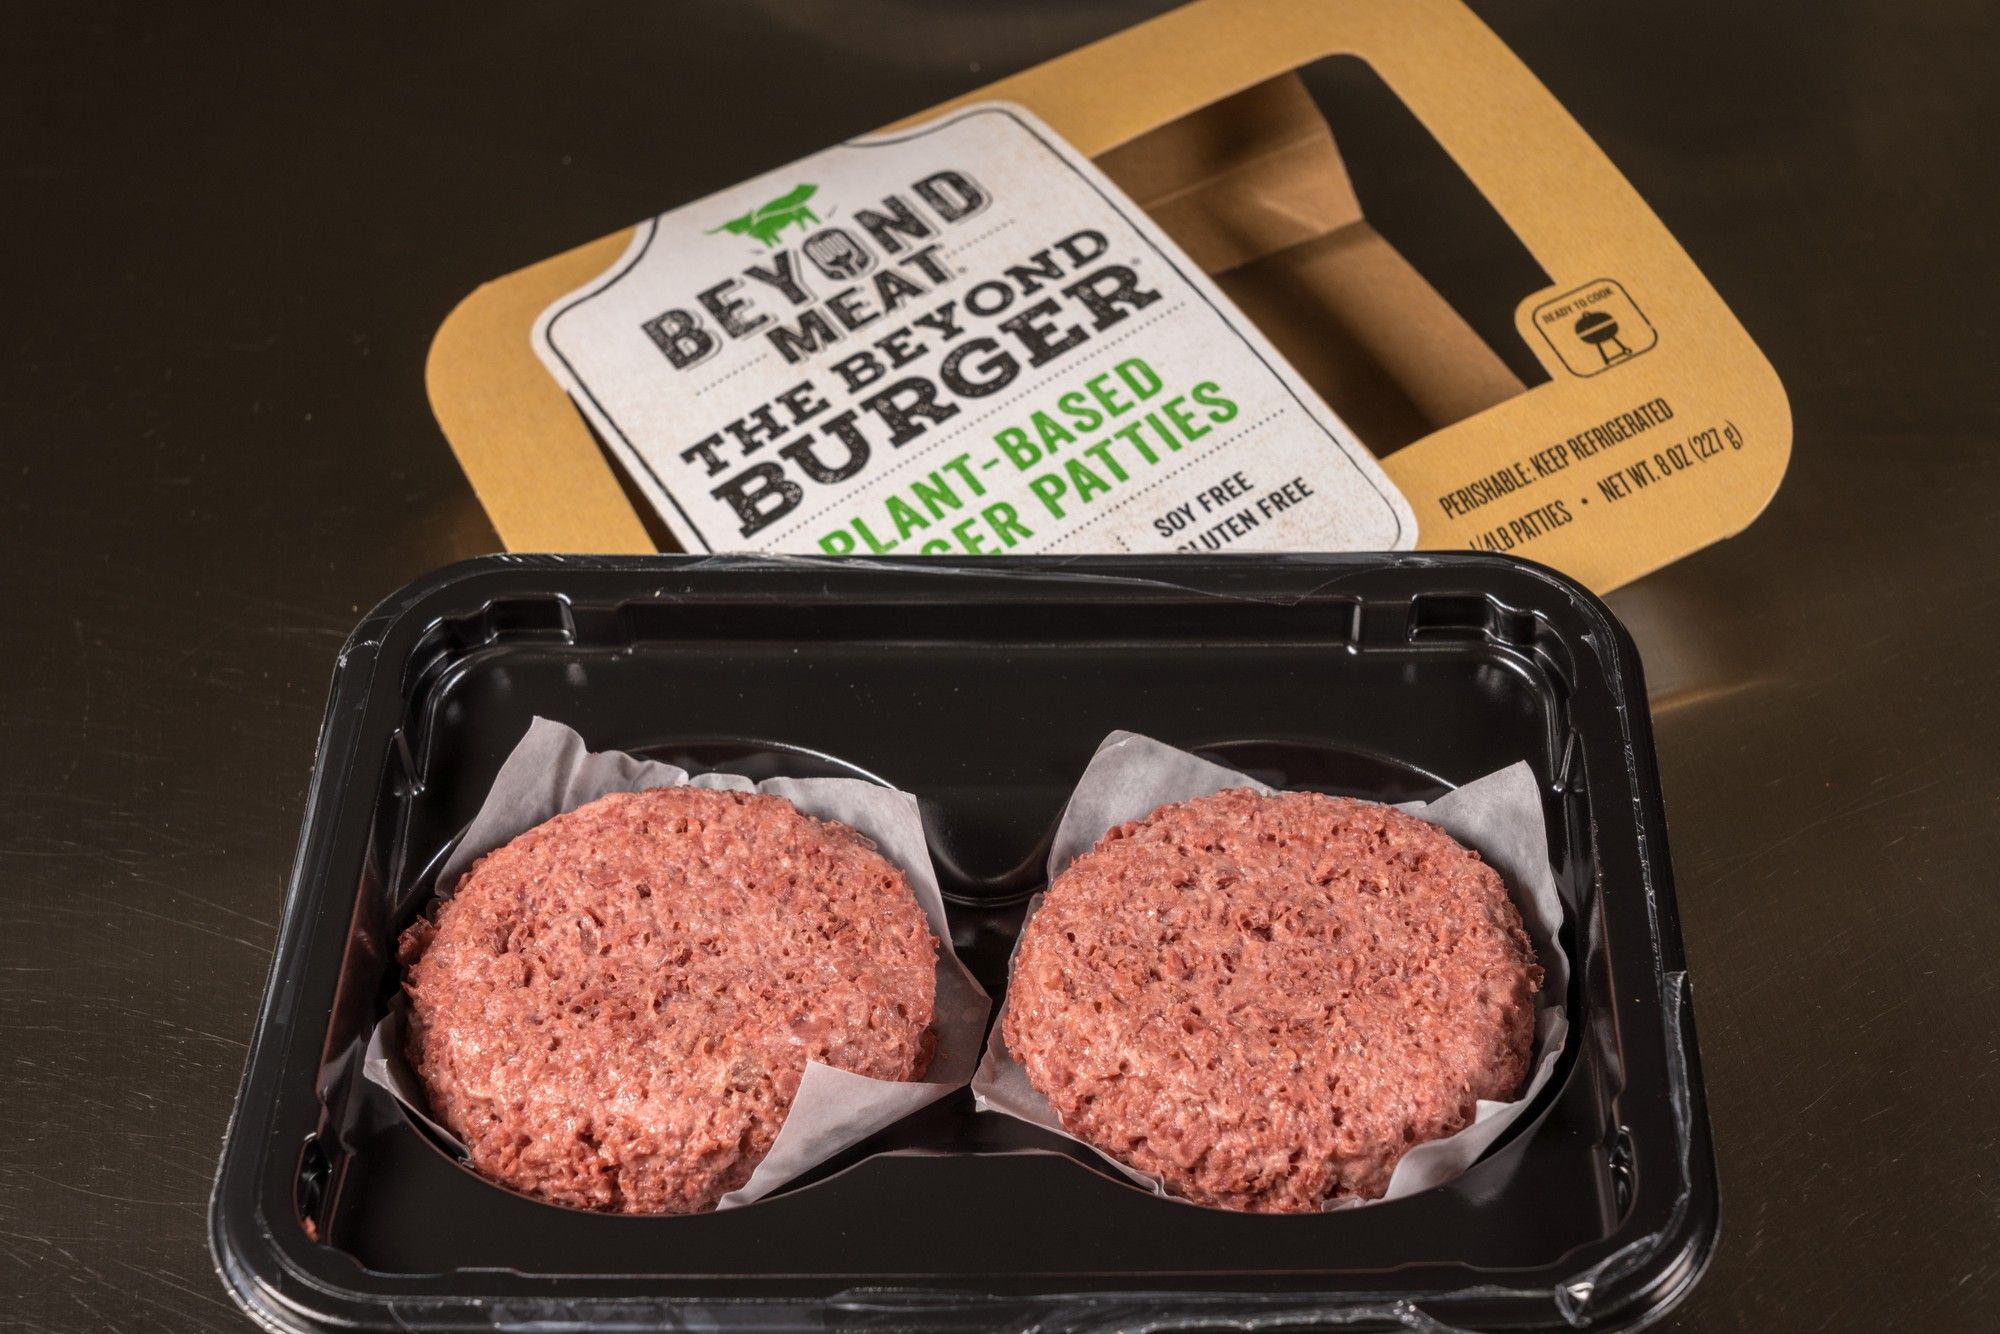 Beyond Meat allegedly sends unsolicited PETA texts